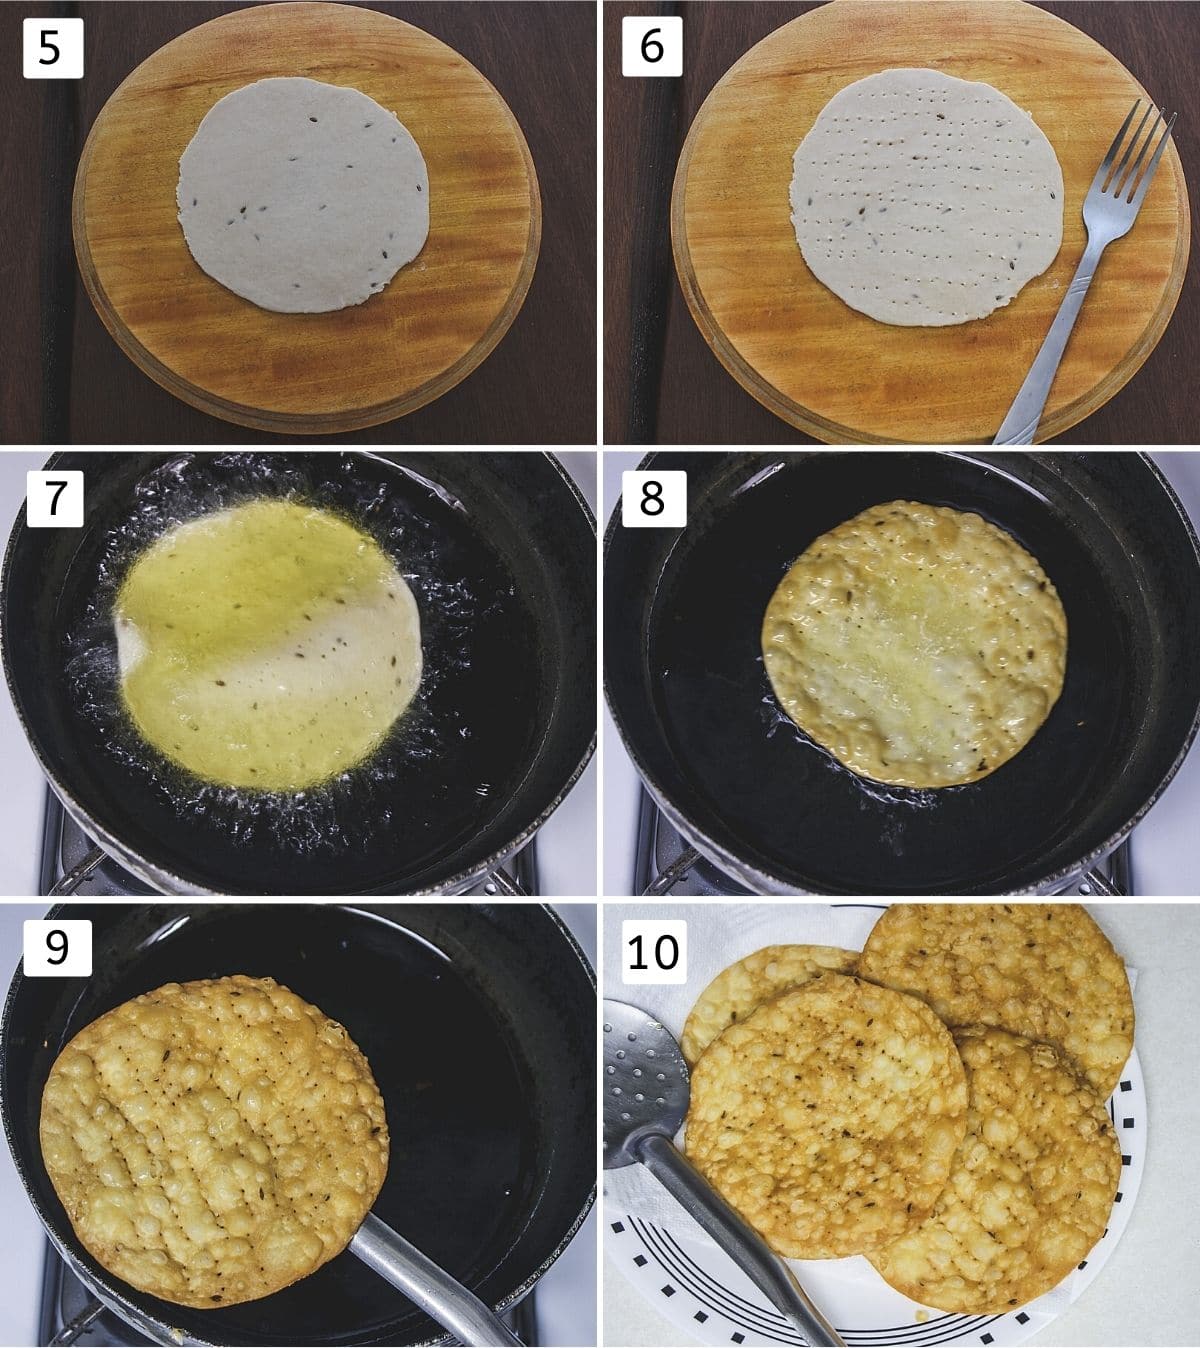 Collage of 6 images showing rolling and pricking pakwan, deep frying into oil an fried pakwan.